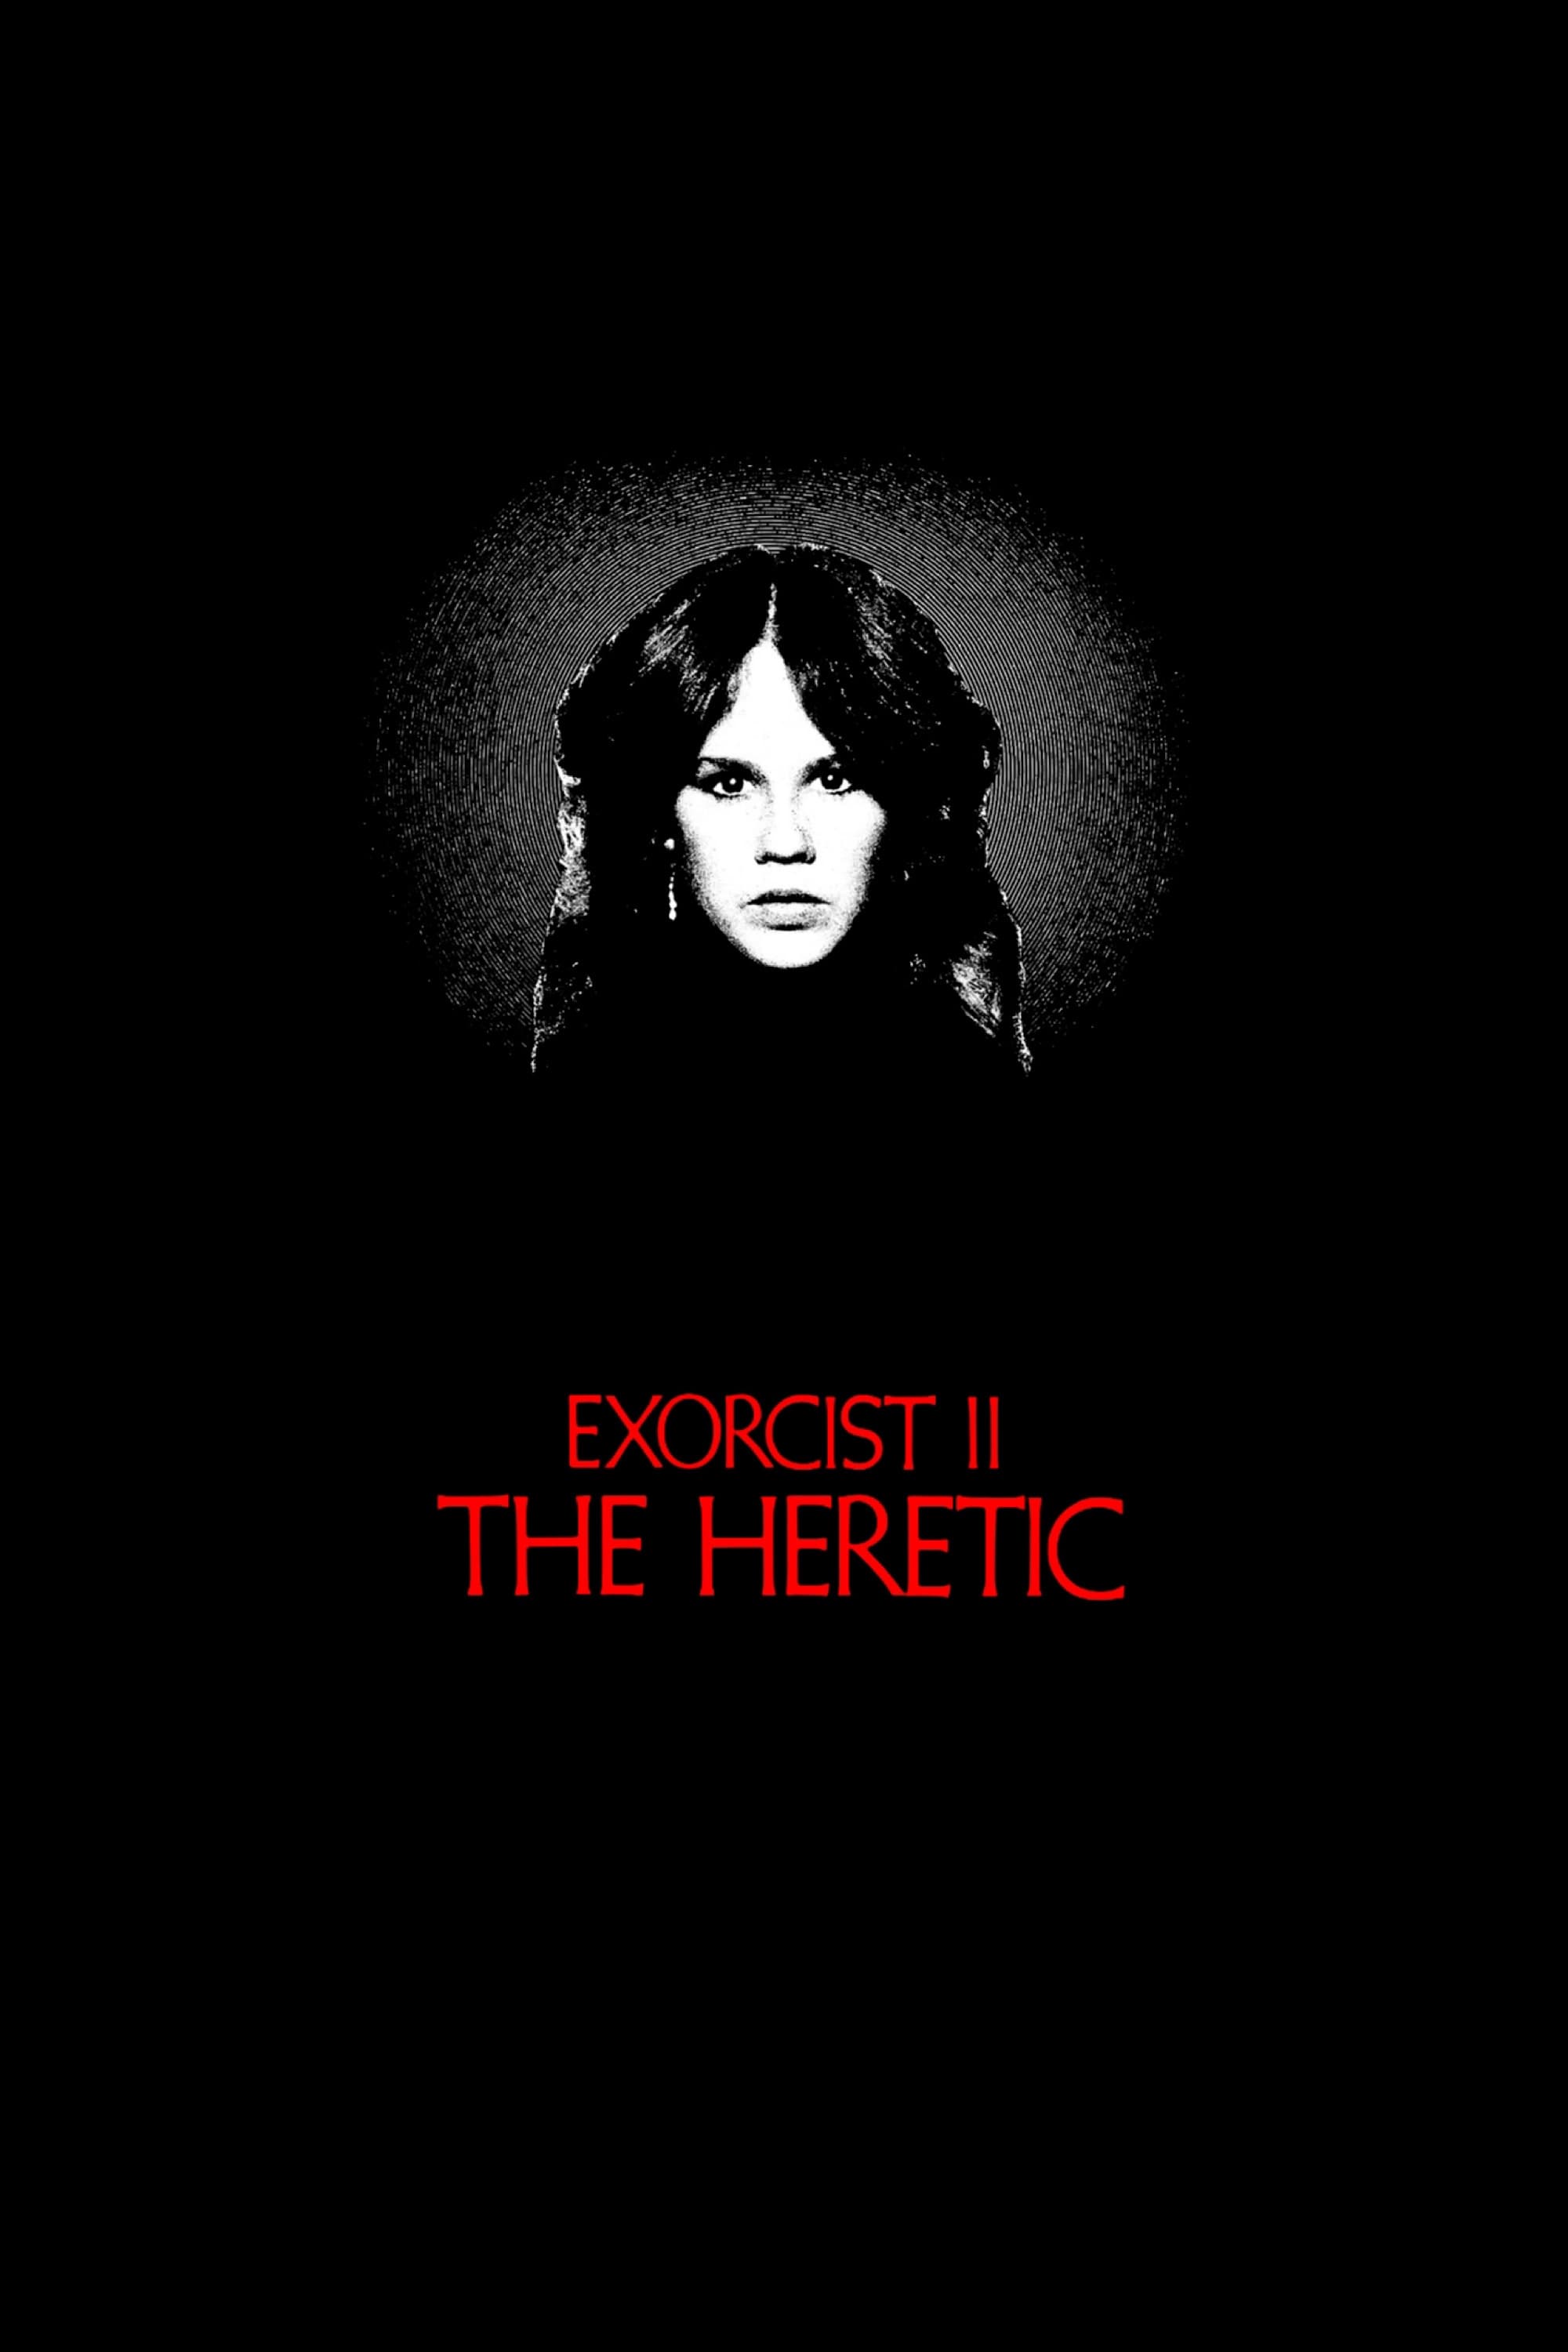 Exorcist II: The Heretic Movie poster